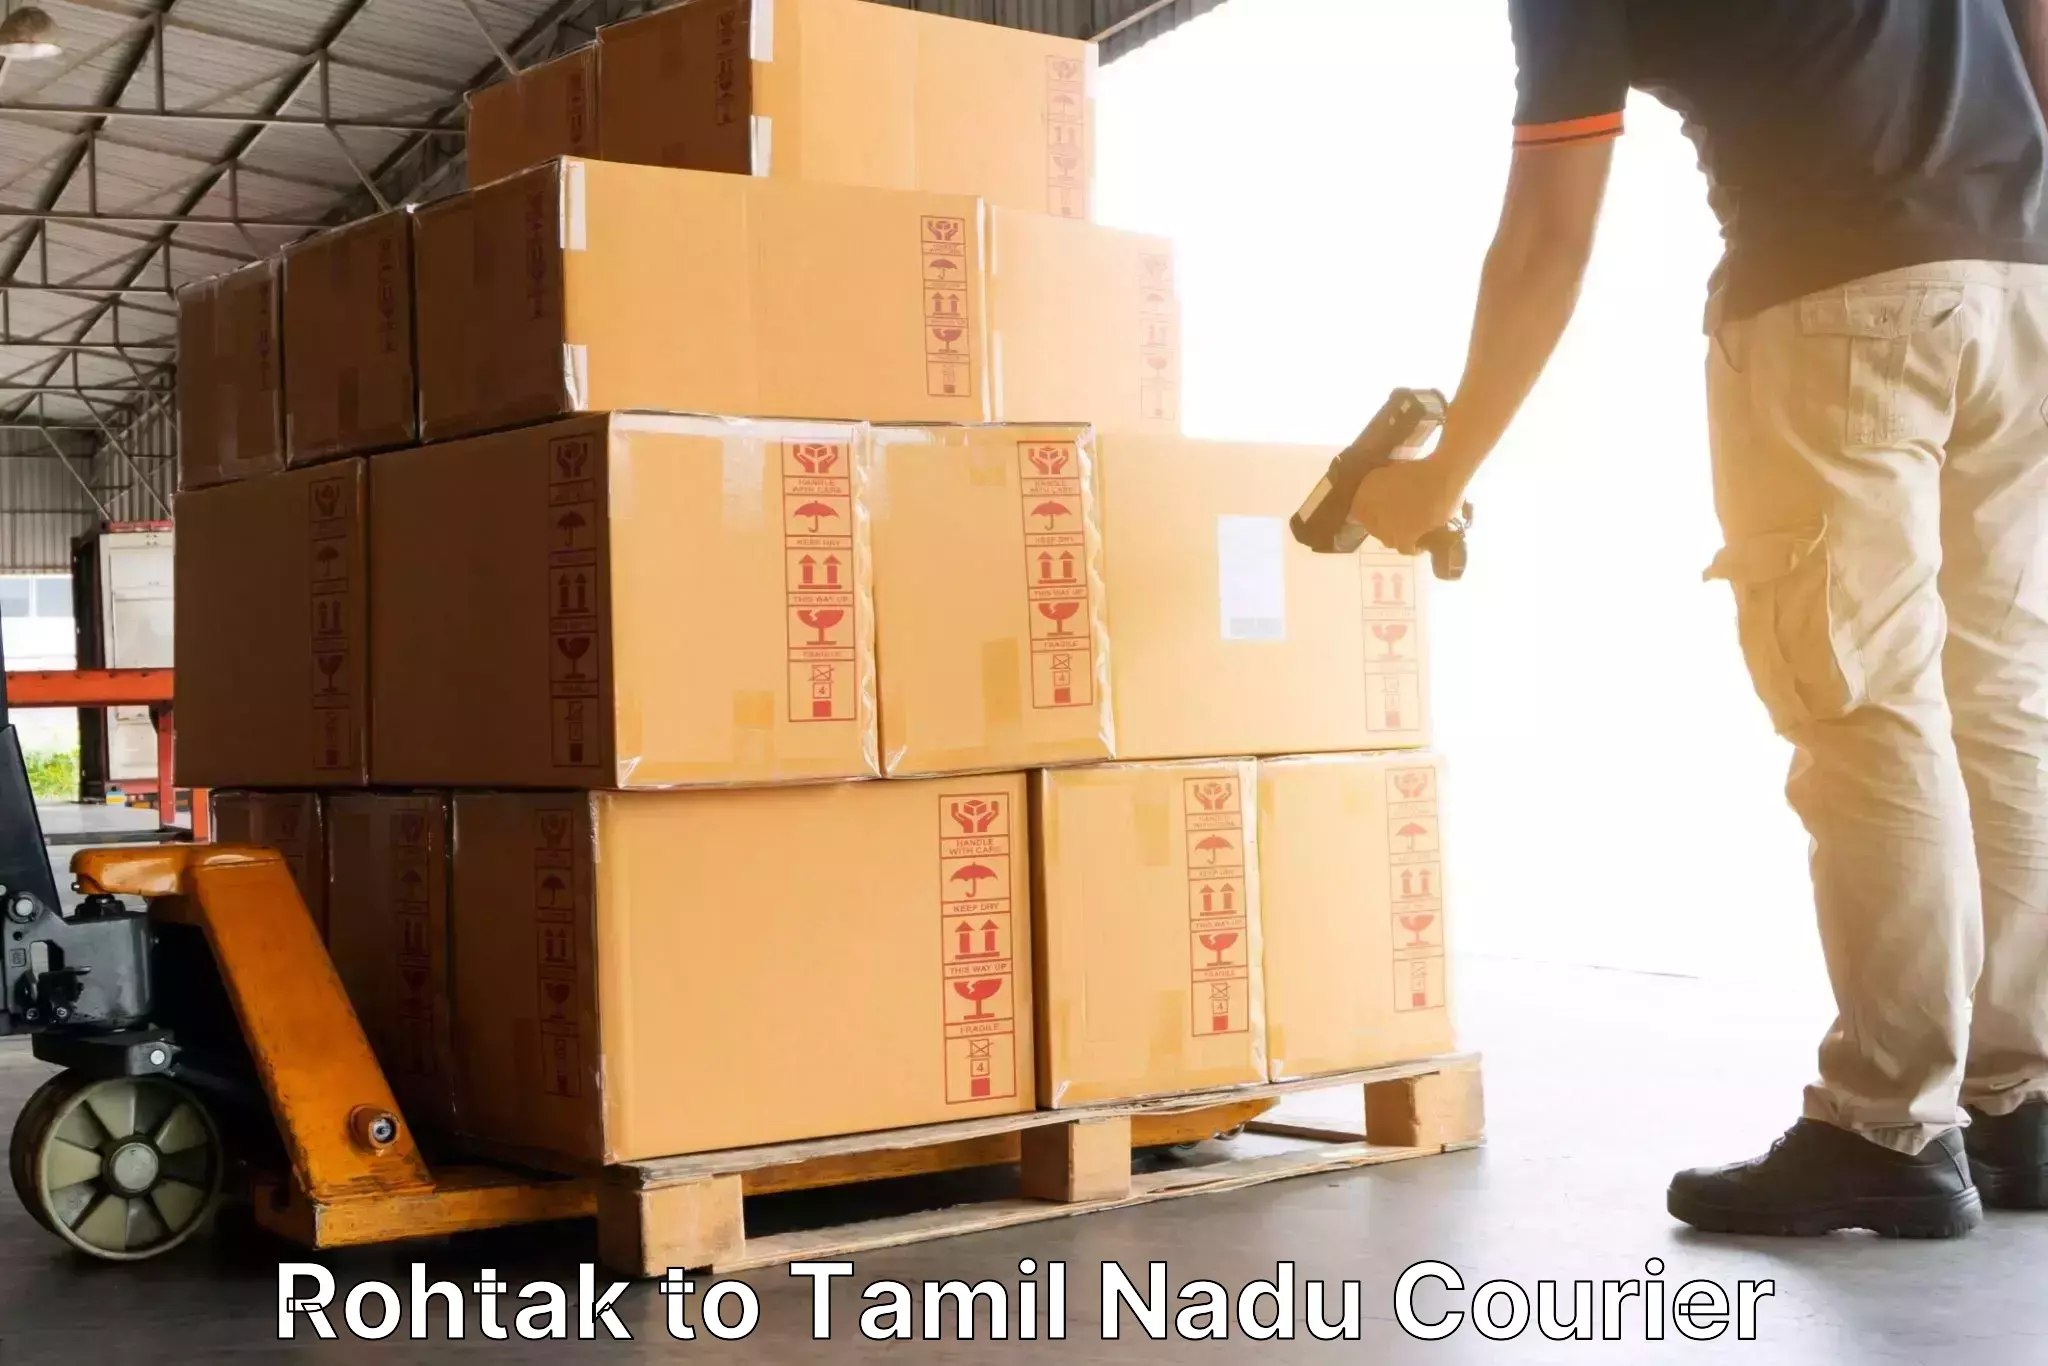 Efficient parcel service Rohtak to Ooty